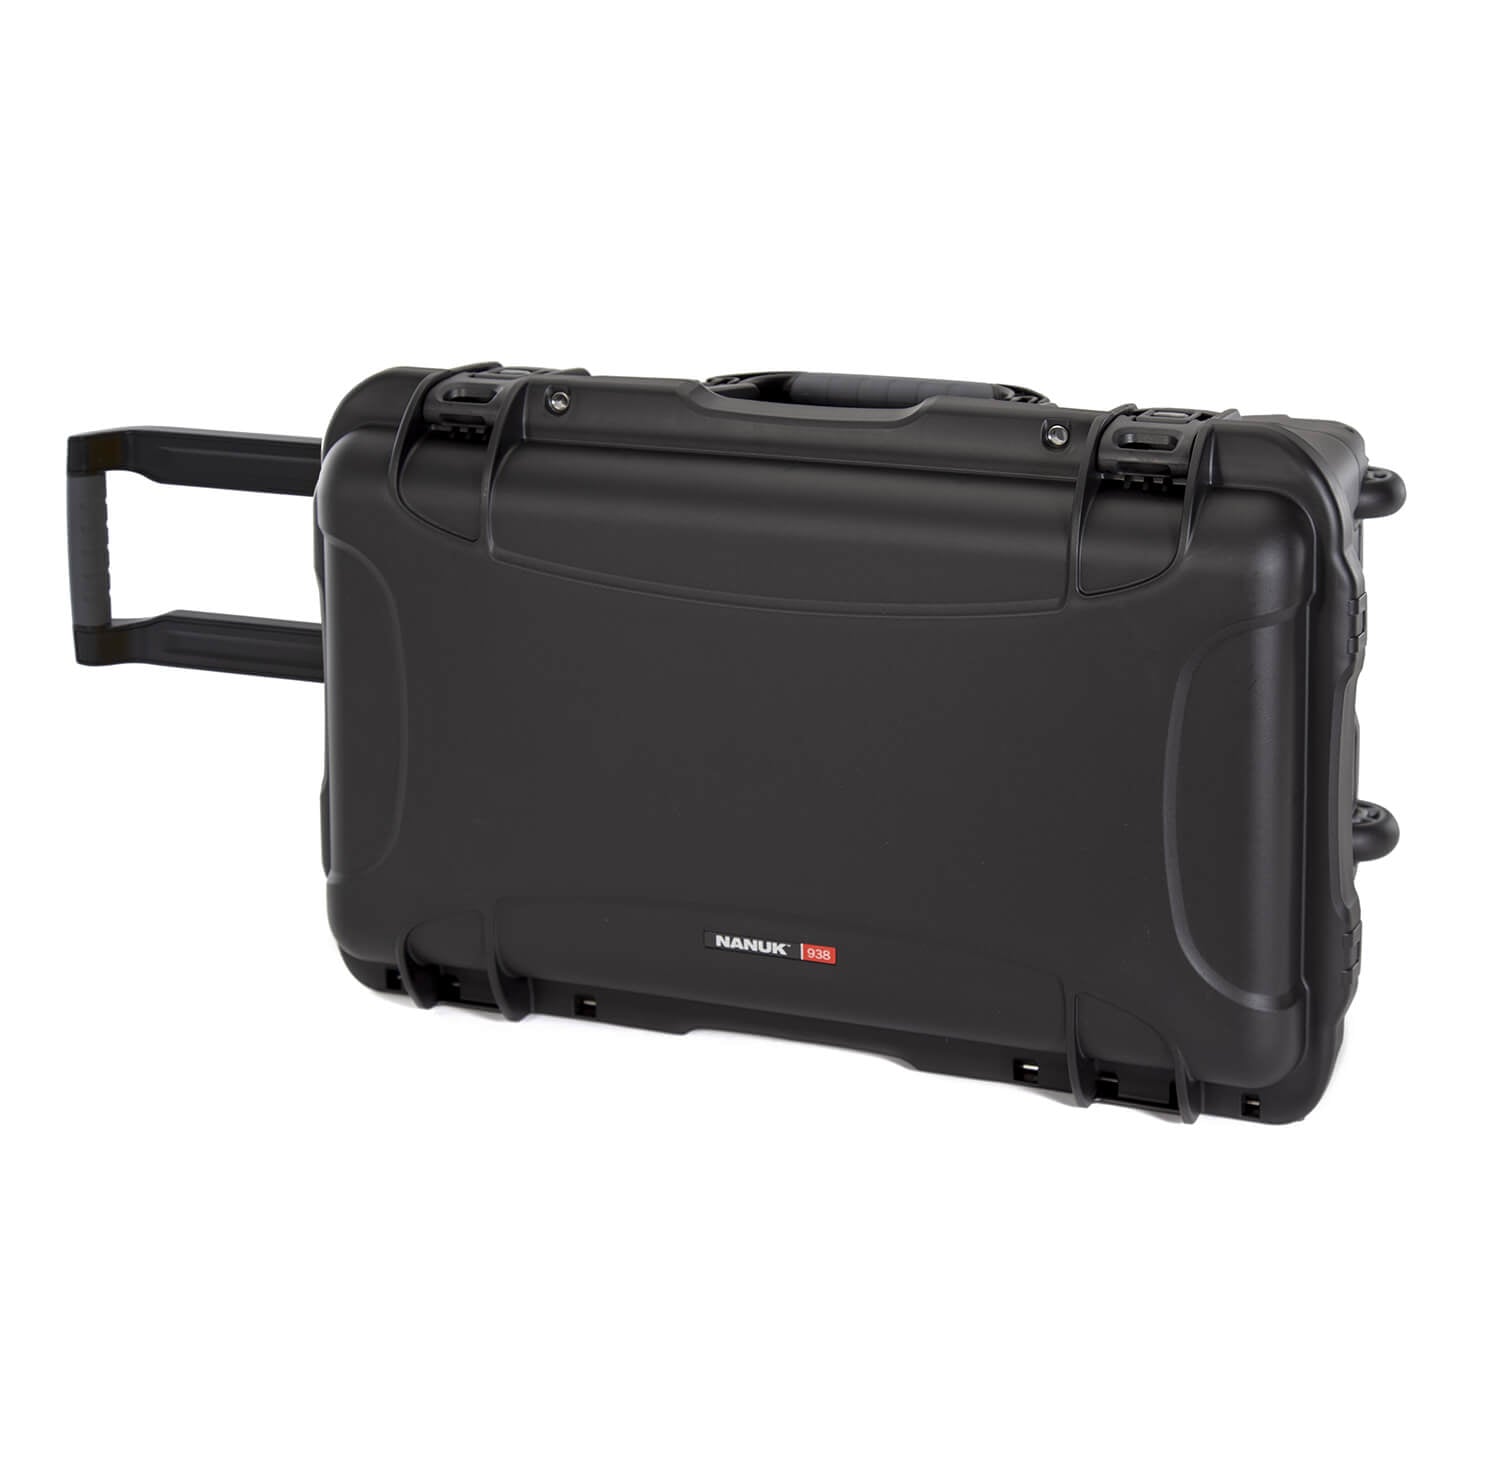 Nanuk 938 Hard Case with Handle and Wheels